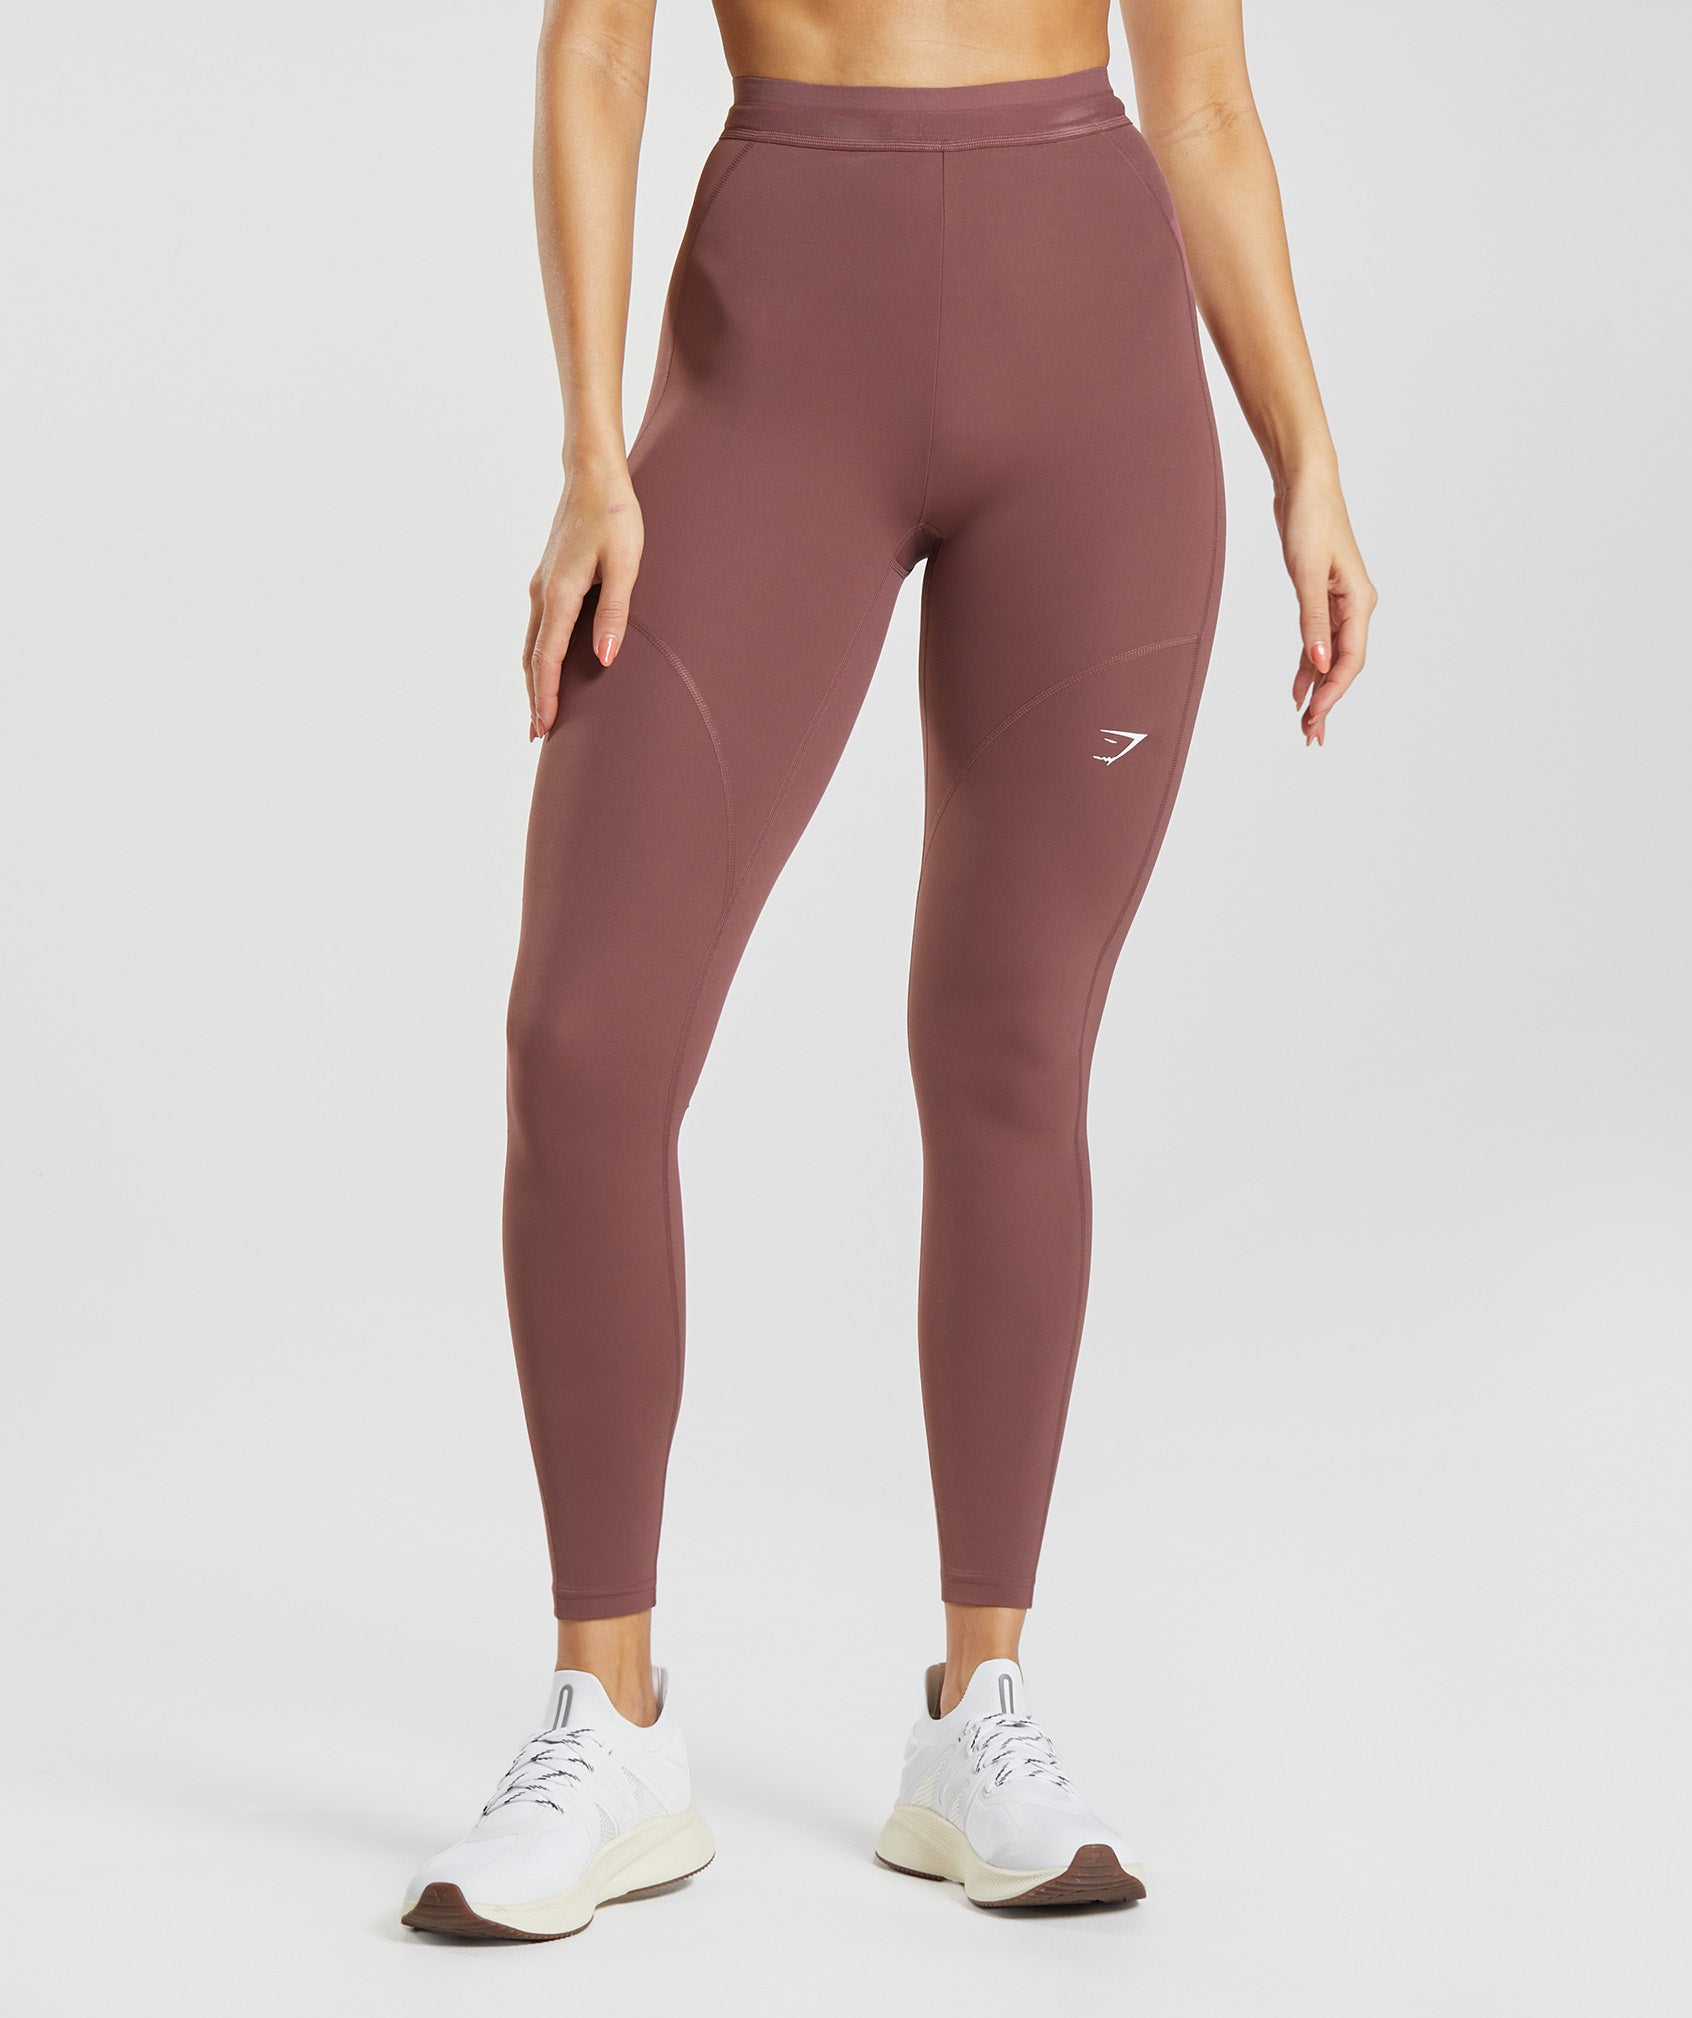 Gymshark Training Cropped Leggings - Cherry Brown - Extra Small in